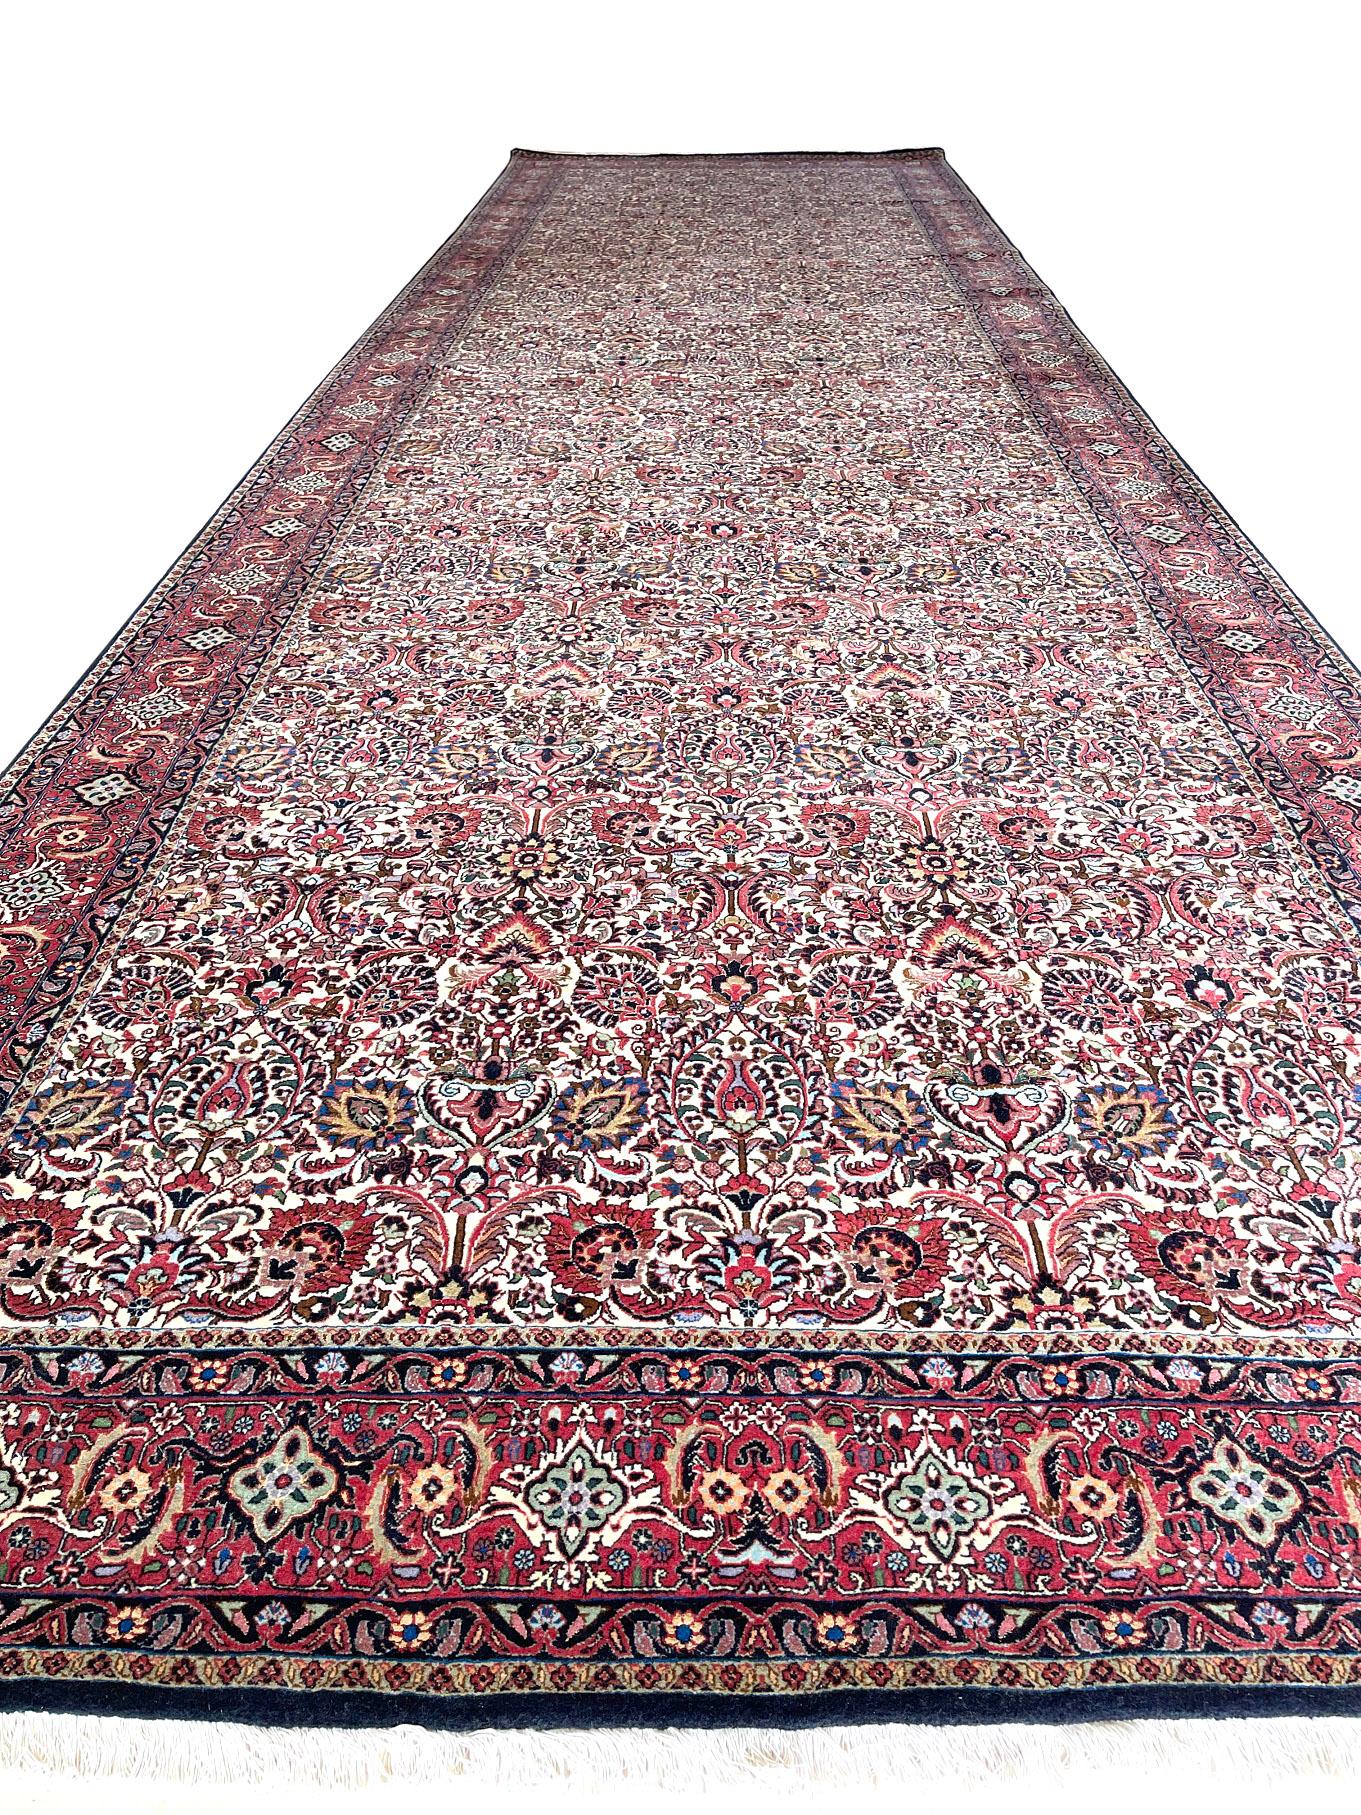 This runner is a handmade Persian rug. The pile is wool & silk with cotton foundation, the pile is incredible dense and strong. This stunning Persian Bijar rug is among the most hardwearing rug. It is made using high-quality wool, and the knots are